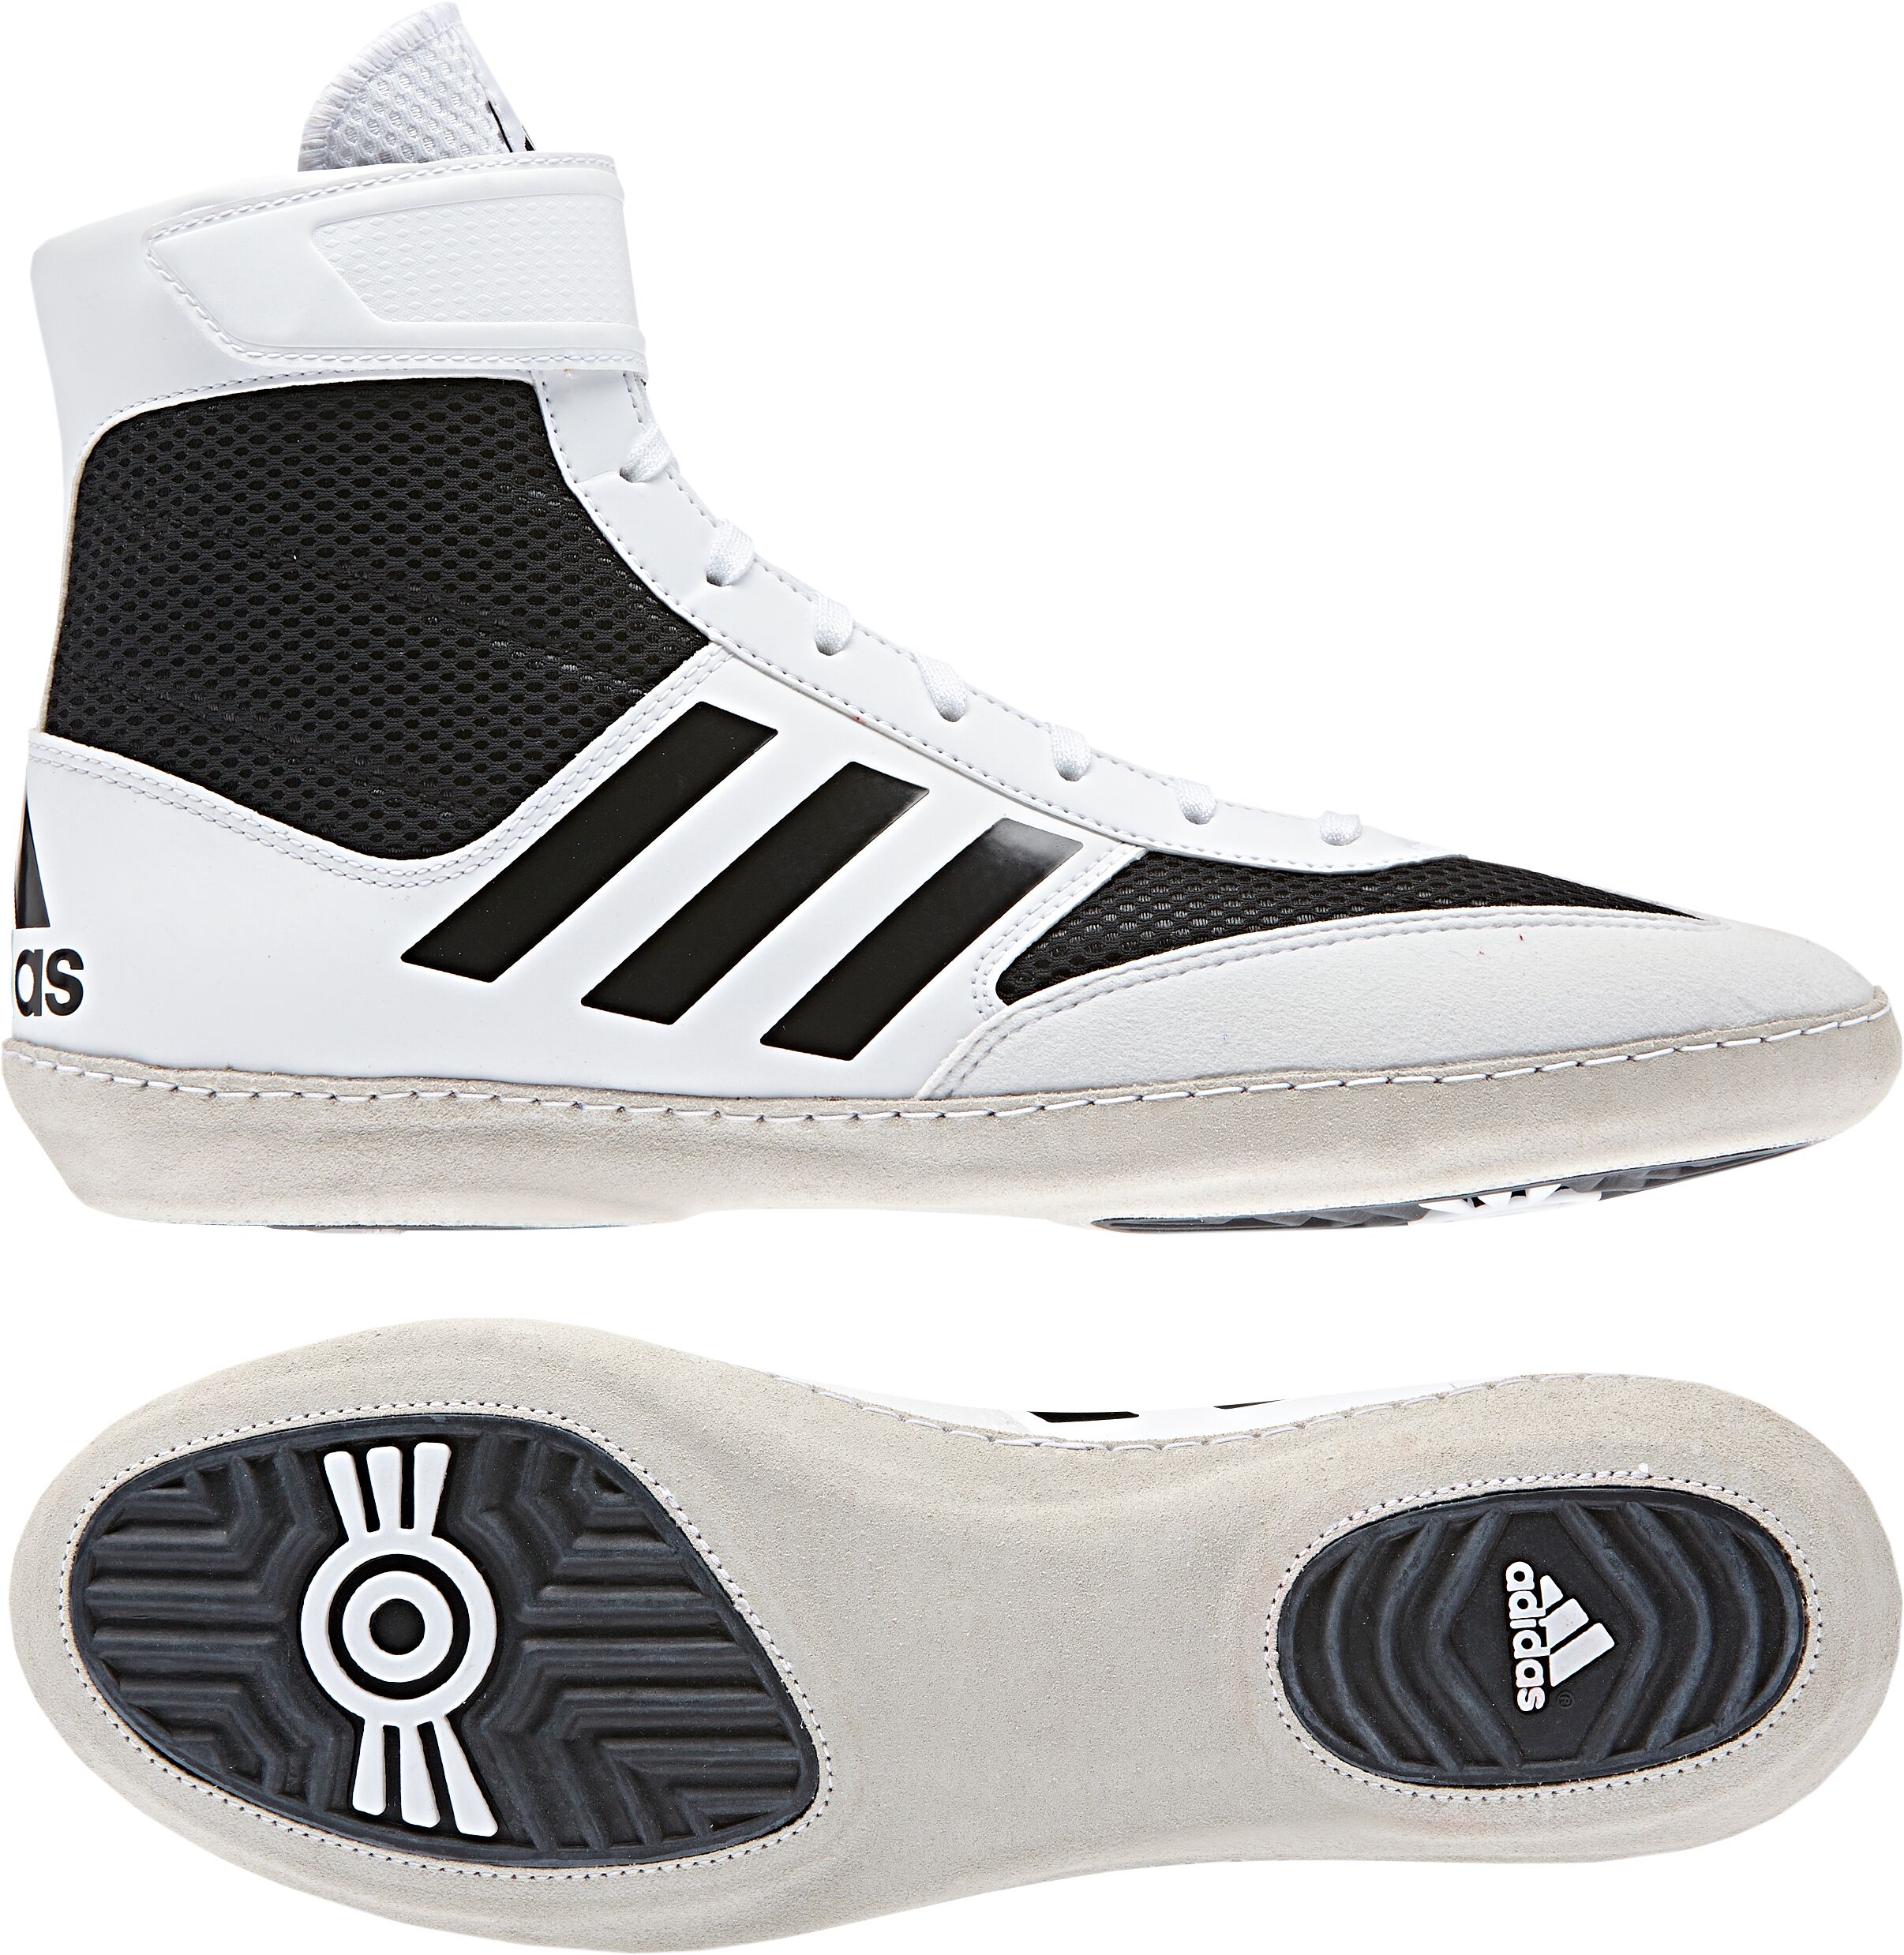 Adidas Combat Speed 5 Wrestling Shoes, color: White/Black